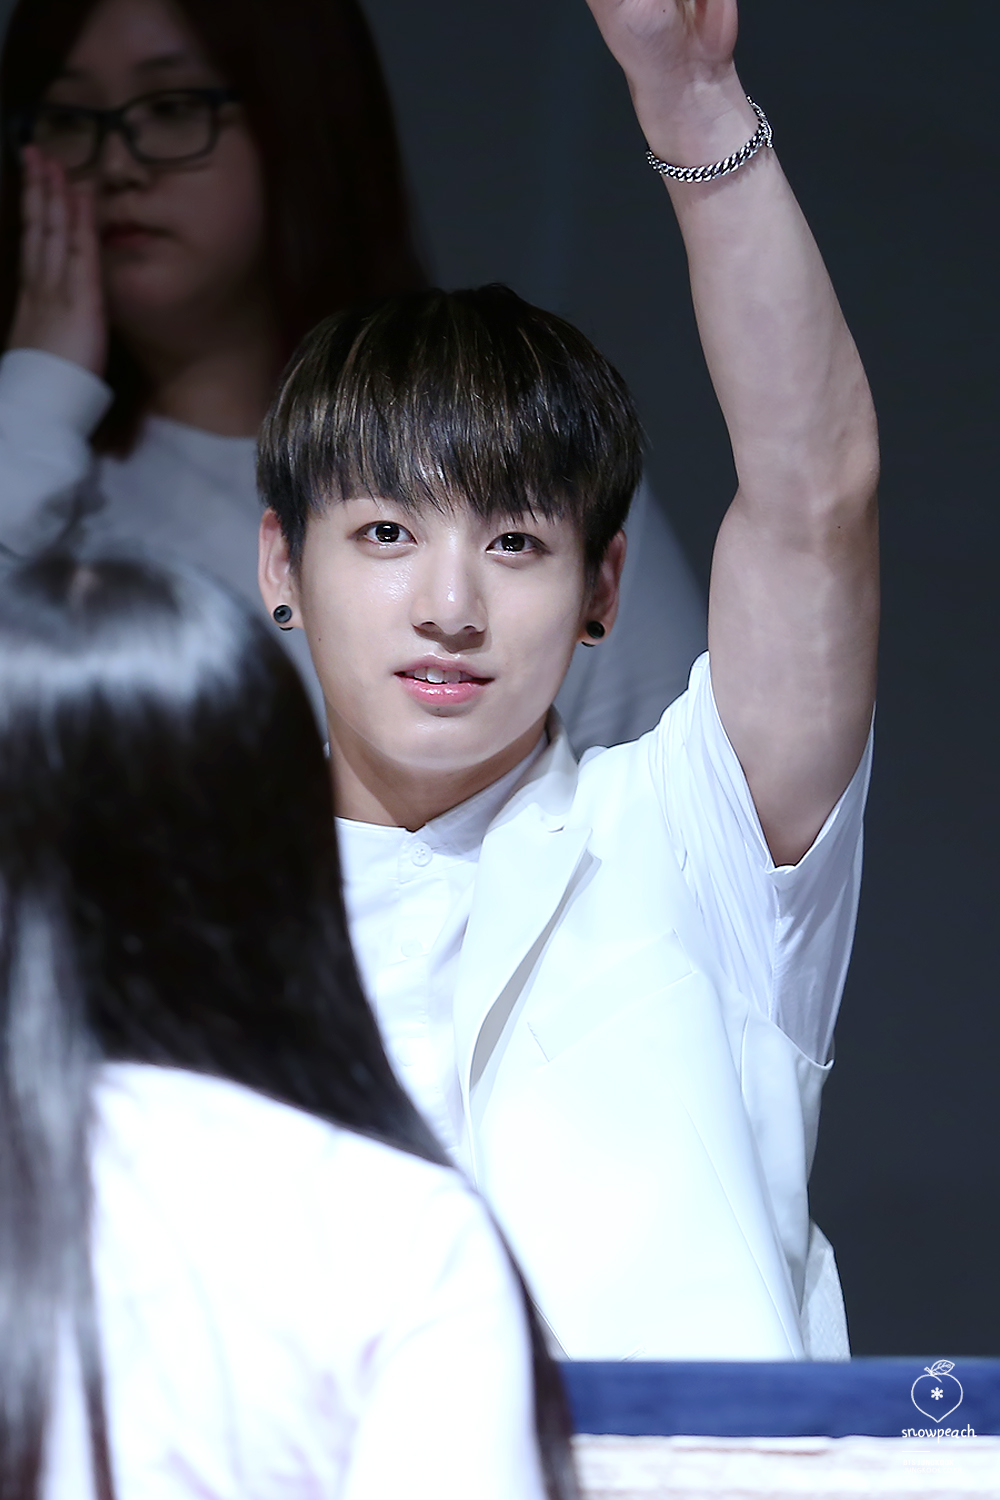 noona meroyan: 33 Reasons You Should Be In Love With Jungkook